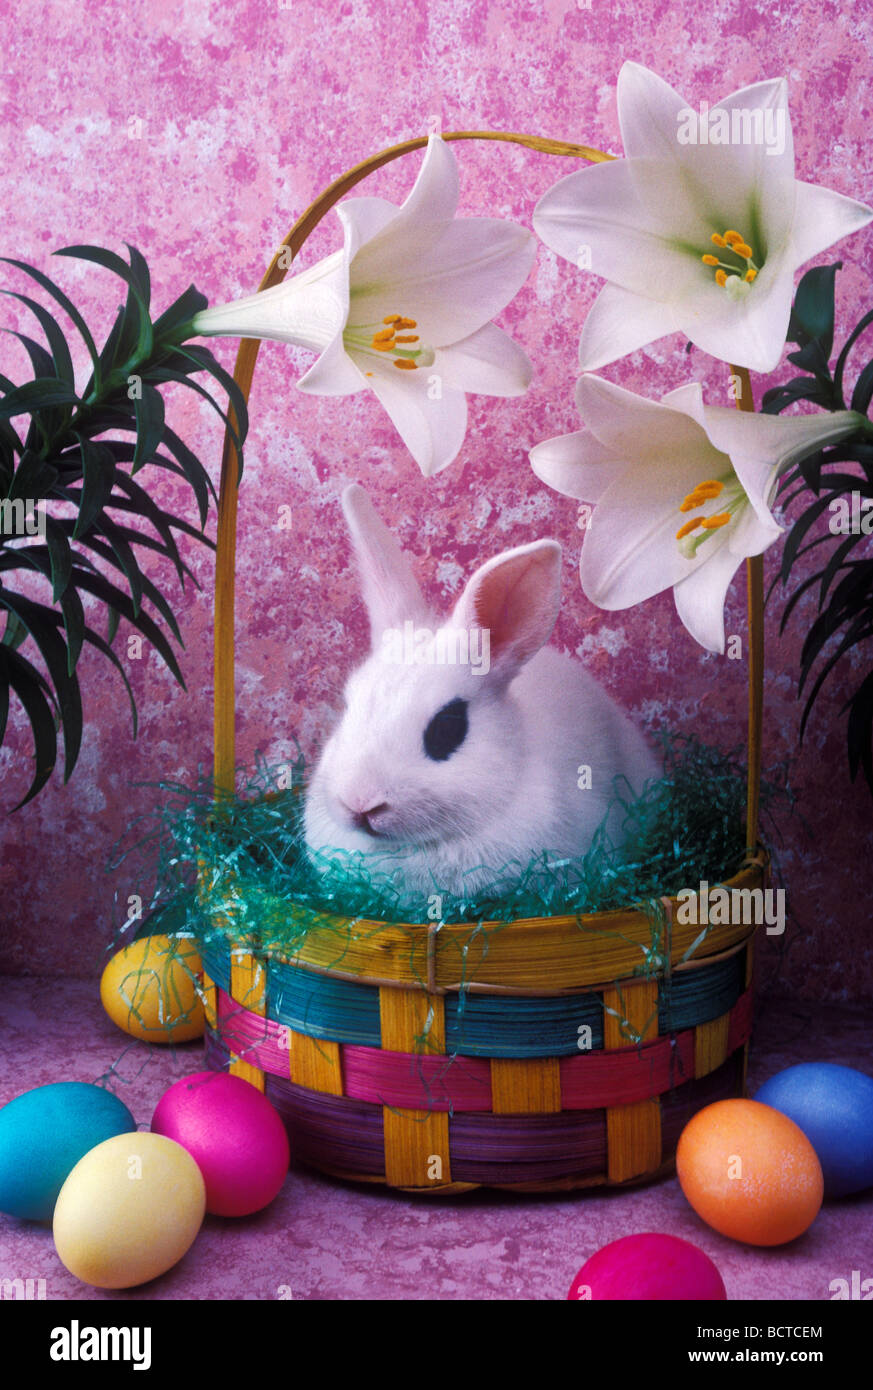 Easter bunny in basket Stock Photo